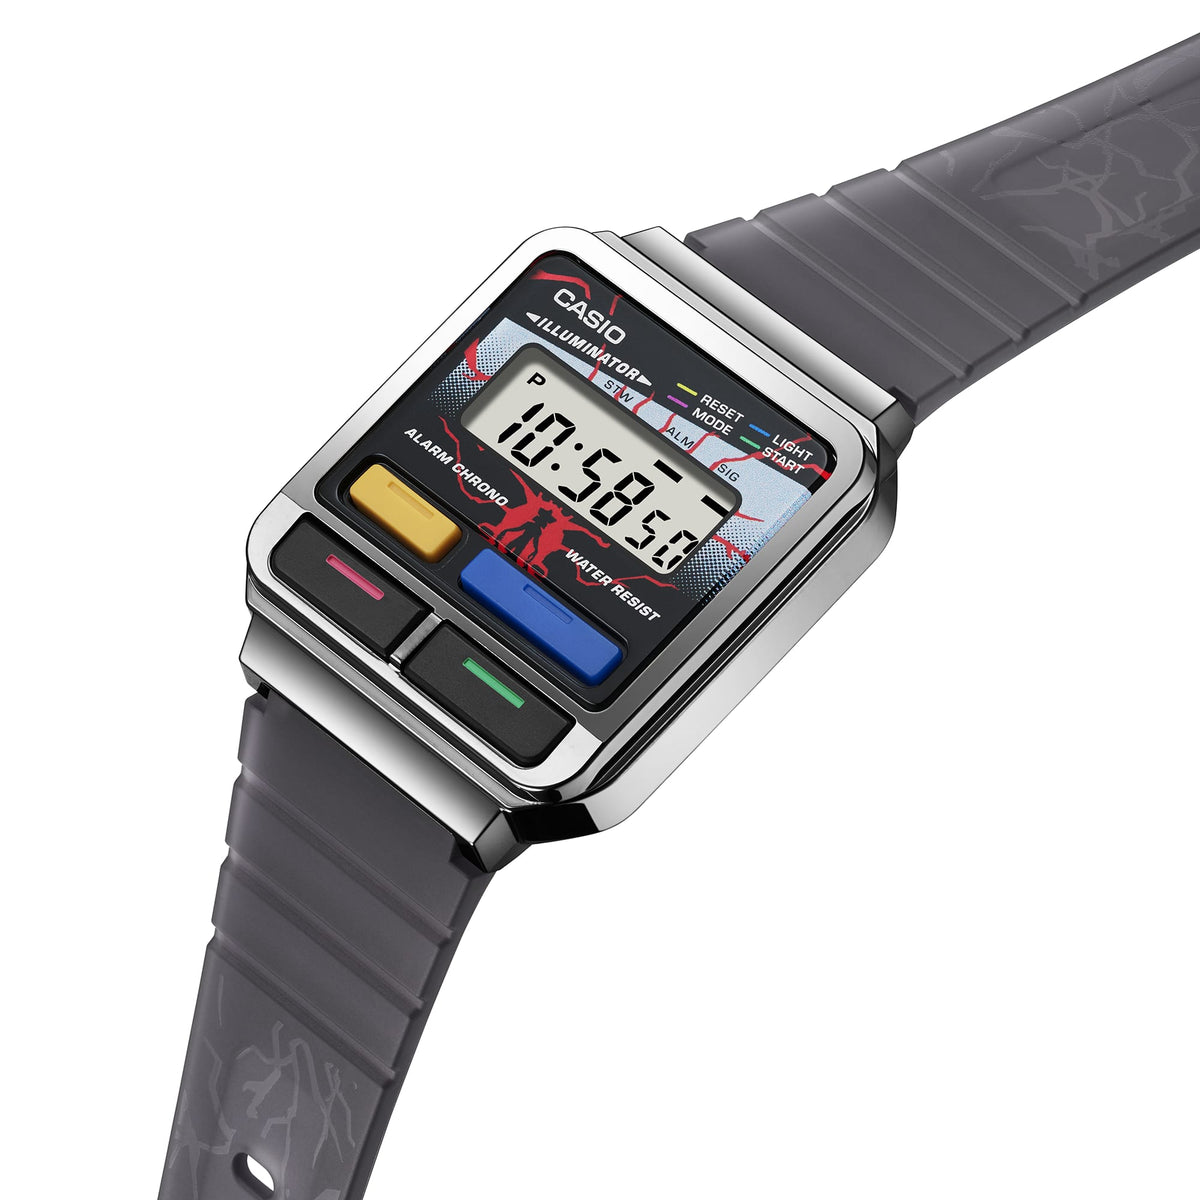 Casio Vintage Digital - A120 Series - Stranger Things Collaboration